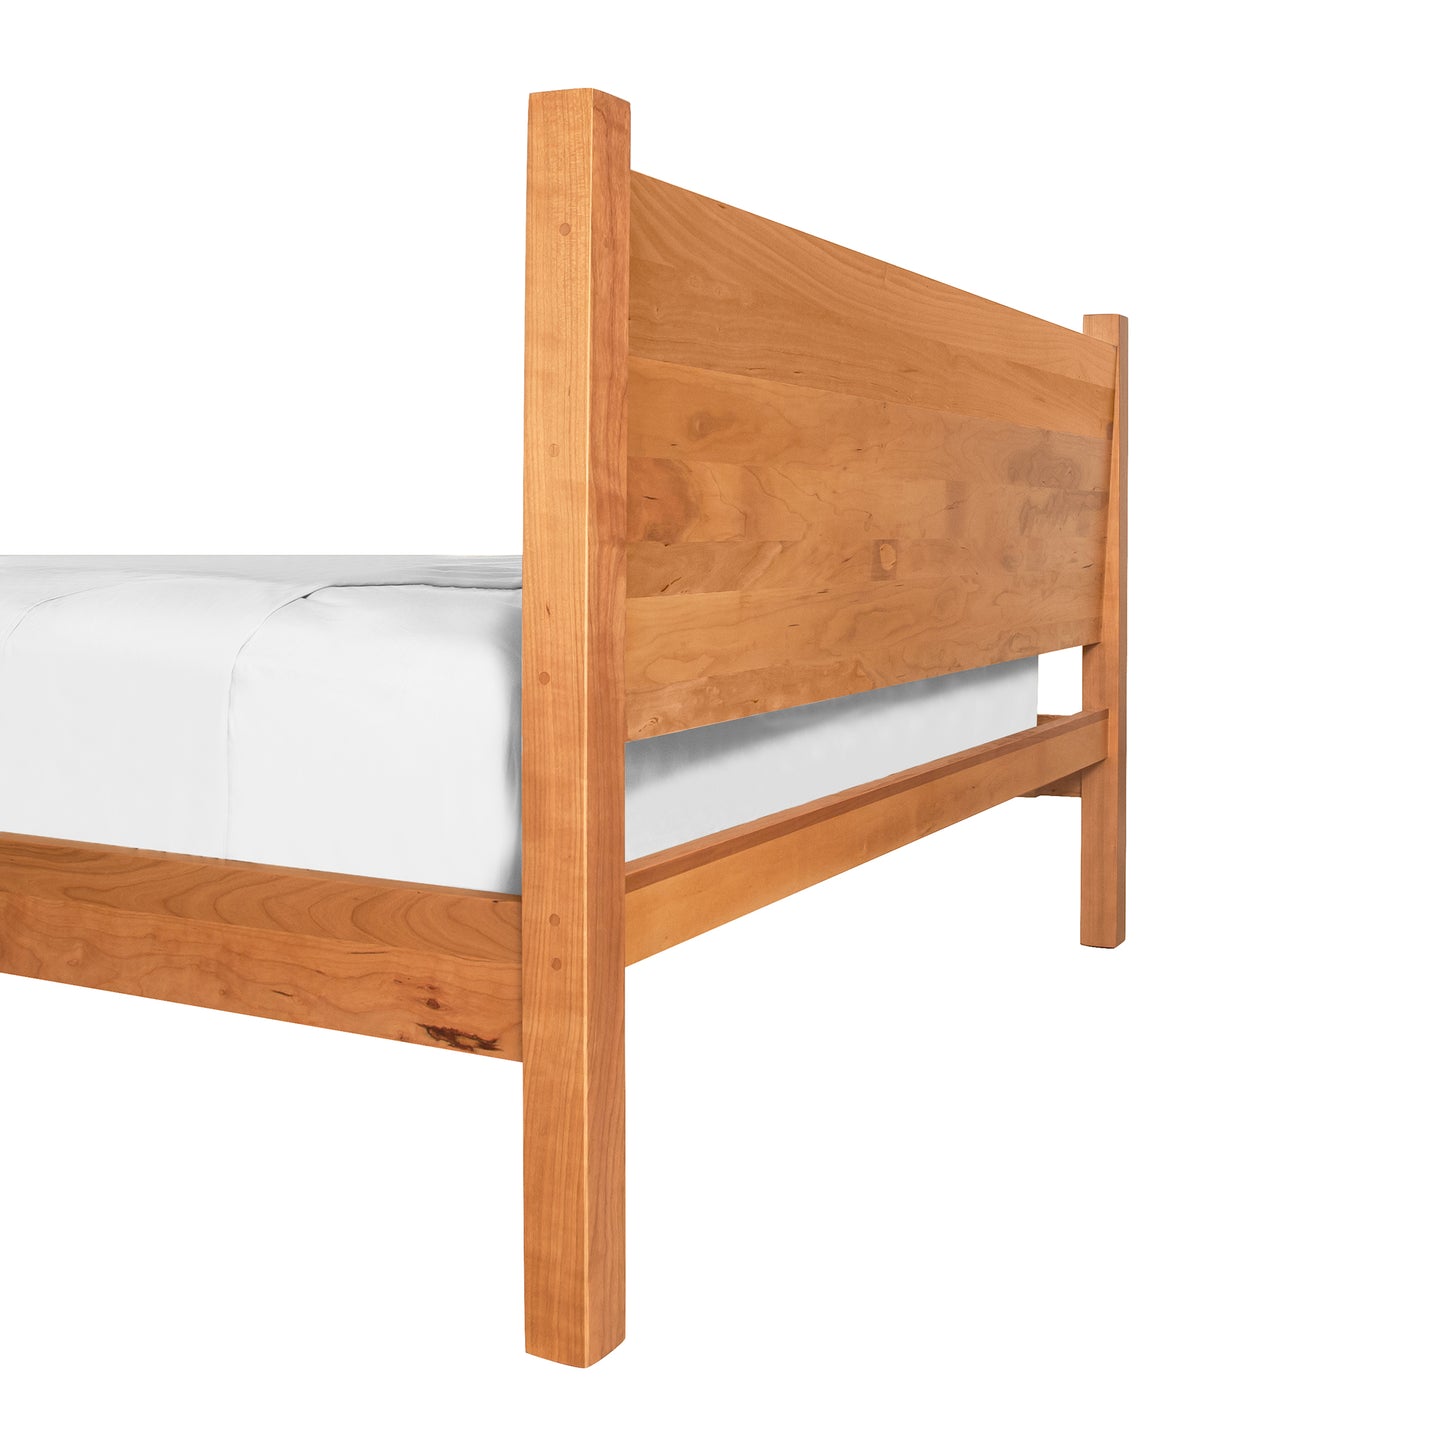 A Classic Wood Bed from Lyndon Furniture with a wooden headboard and footboard.